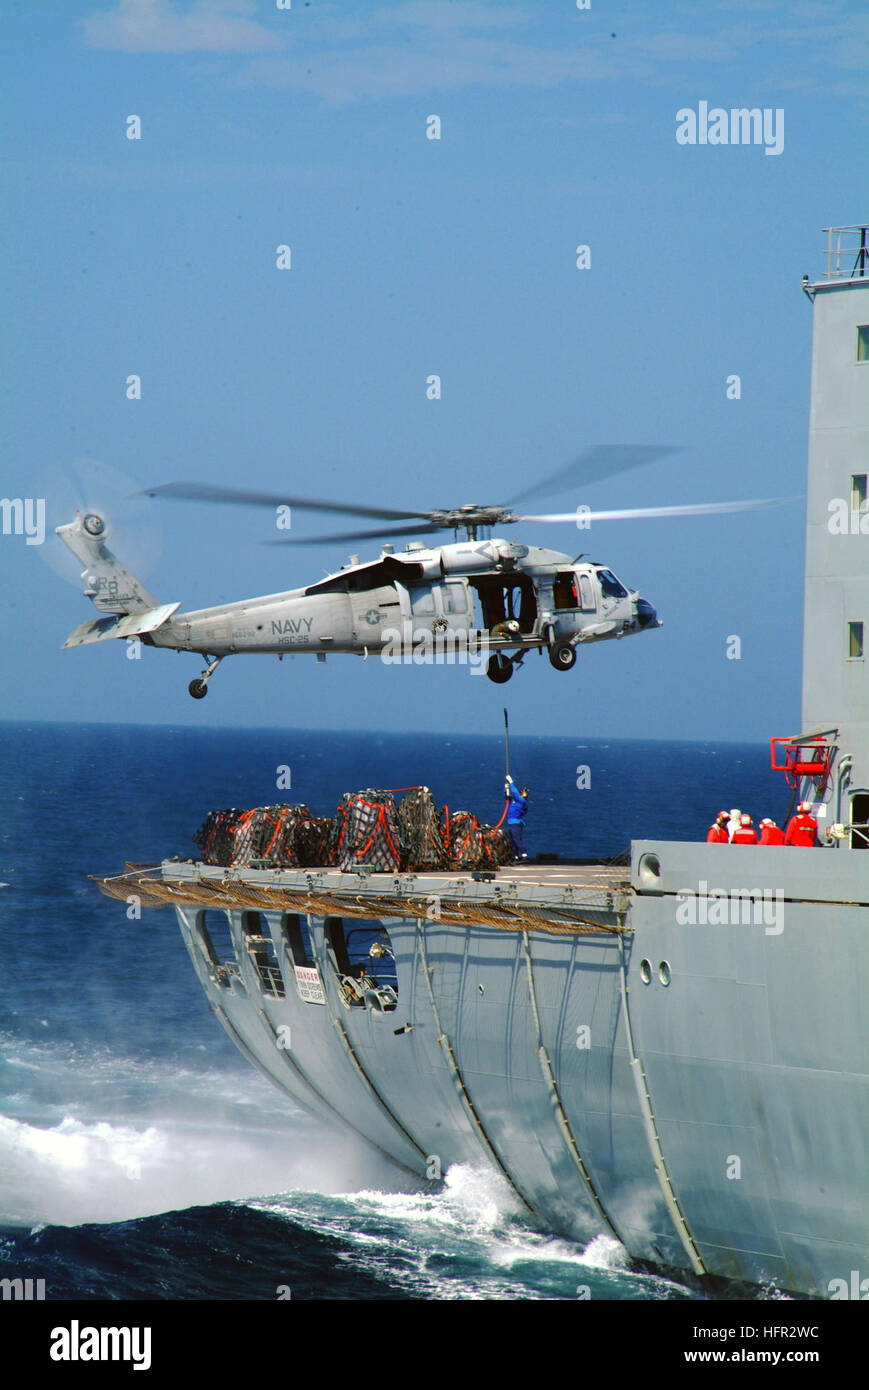 060225-N-4772B-112  Philippine Sea (Feb. 25, 2006) - An HS-60S Seahawk from the Island Knights of Helicopter Sea Combat Squadron 25 (HCS-25) maneuvers over the flight deck of the Military Sealift Command (MSC) fleet replenishment oiler USNS Yukon (T-AO 202), while transferring supplies to the dock landing ship USS Harpers Ferry (LSD 49). Sailors and Marines from the Forward Deployed Amphibious Ready Group (ARG), USS Harpers Ferry (LSD 49) and USS Essex (LHD 2) arrived off the coast of Leyte Feb. 19 to provide humanitarian assistance and disaster relief to victims of the Feb. 17 landslide on th Stock Photo